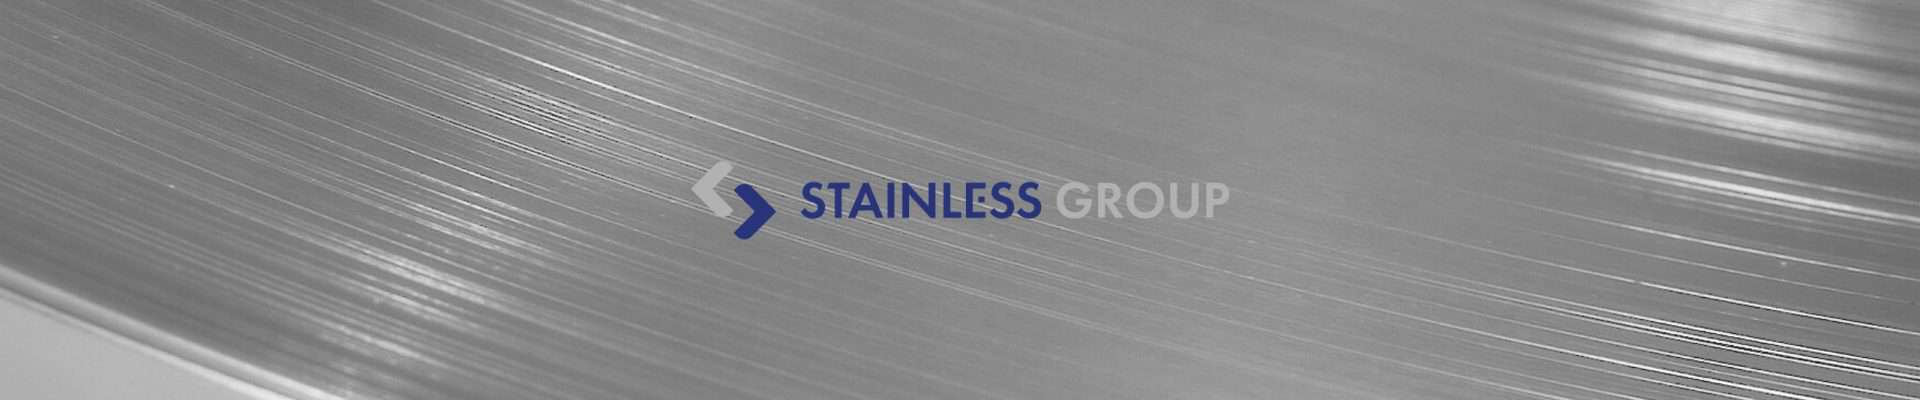 Le groupe Stainless